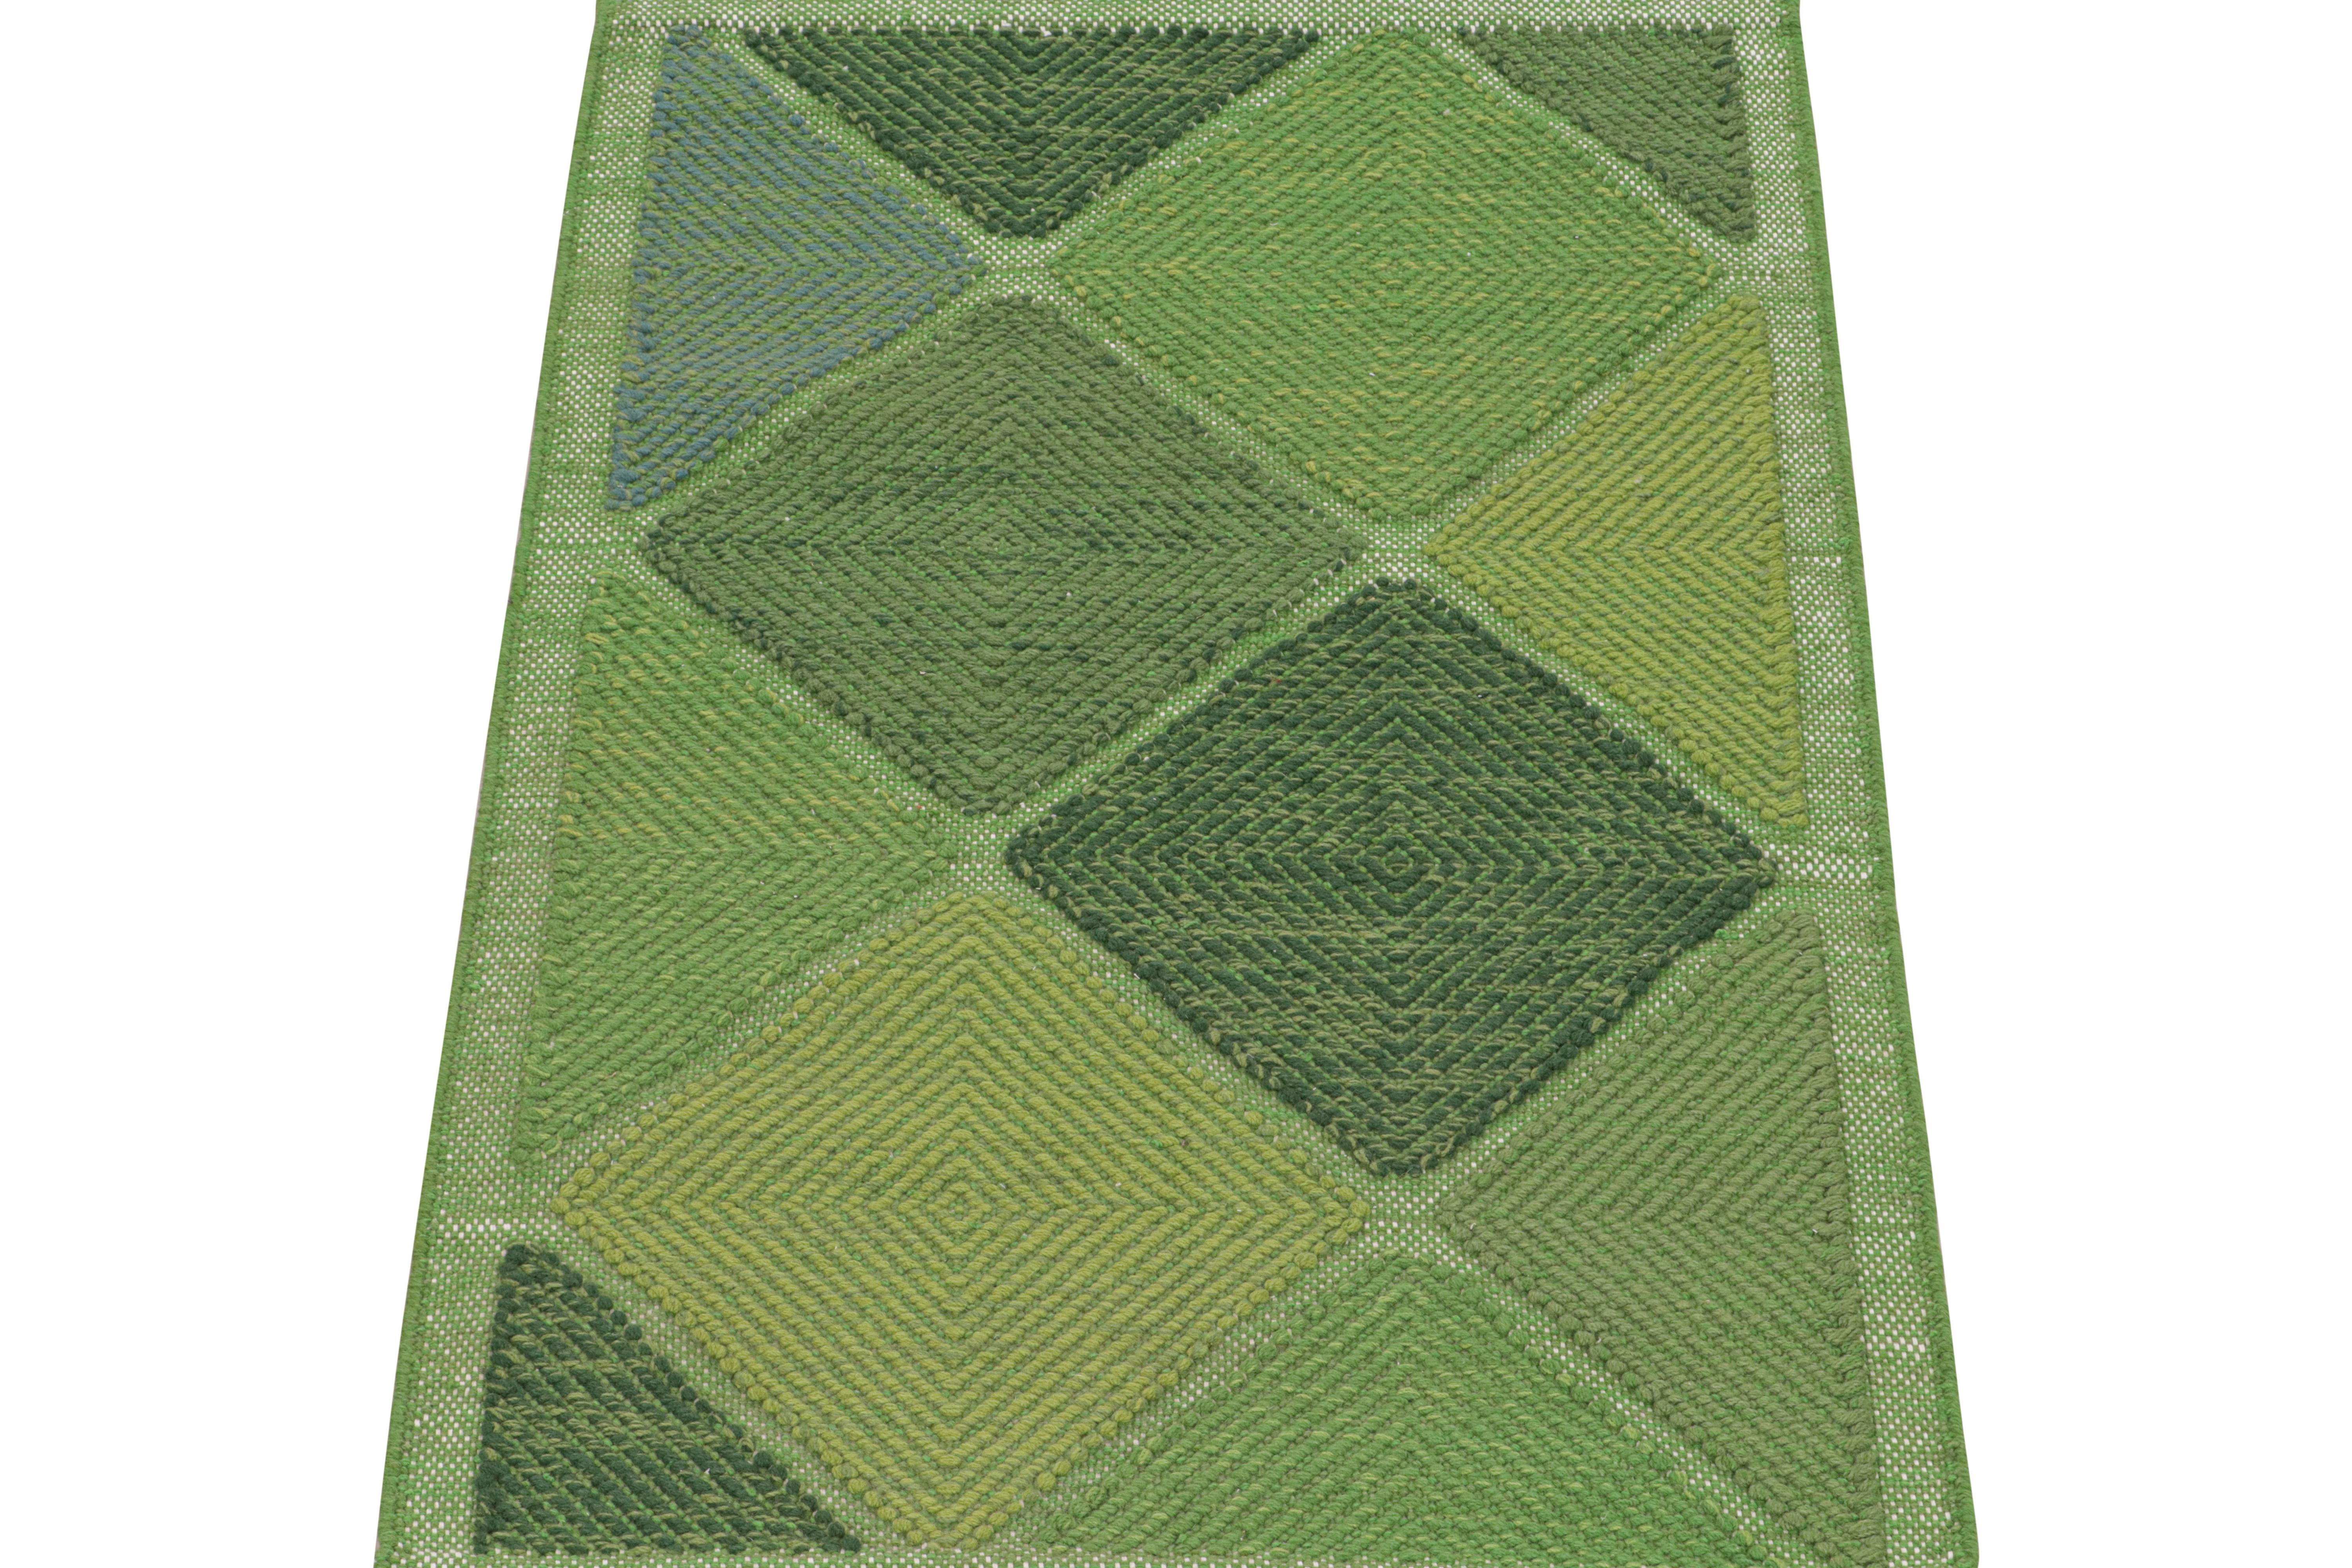 This 3x5 flat weave rug is a new addition to the Scandinavian Kilim collection by Rug & Kilim. Handwoven in wool and natural yarns, its design reflects a contemporary take on mid-century Rollakans and Swedish Deco style.

On the Design:

This